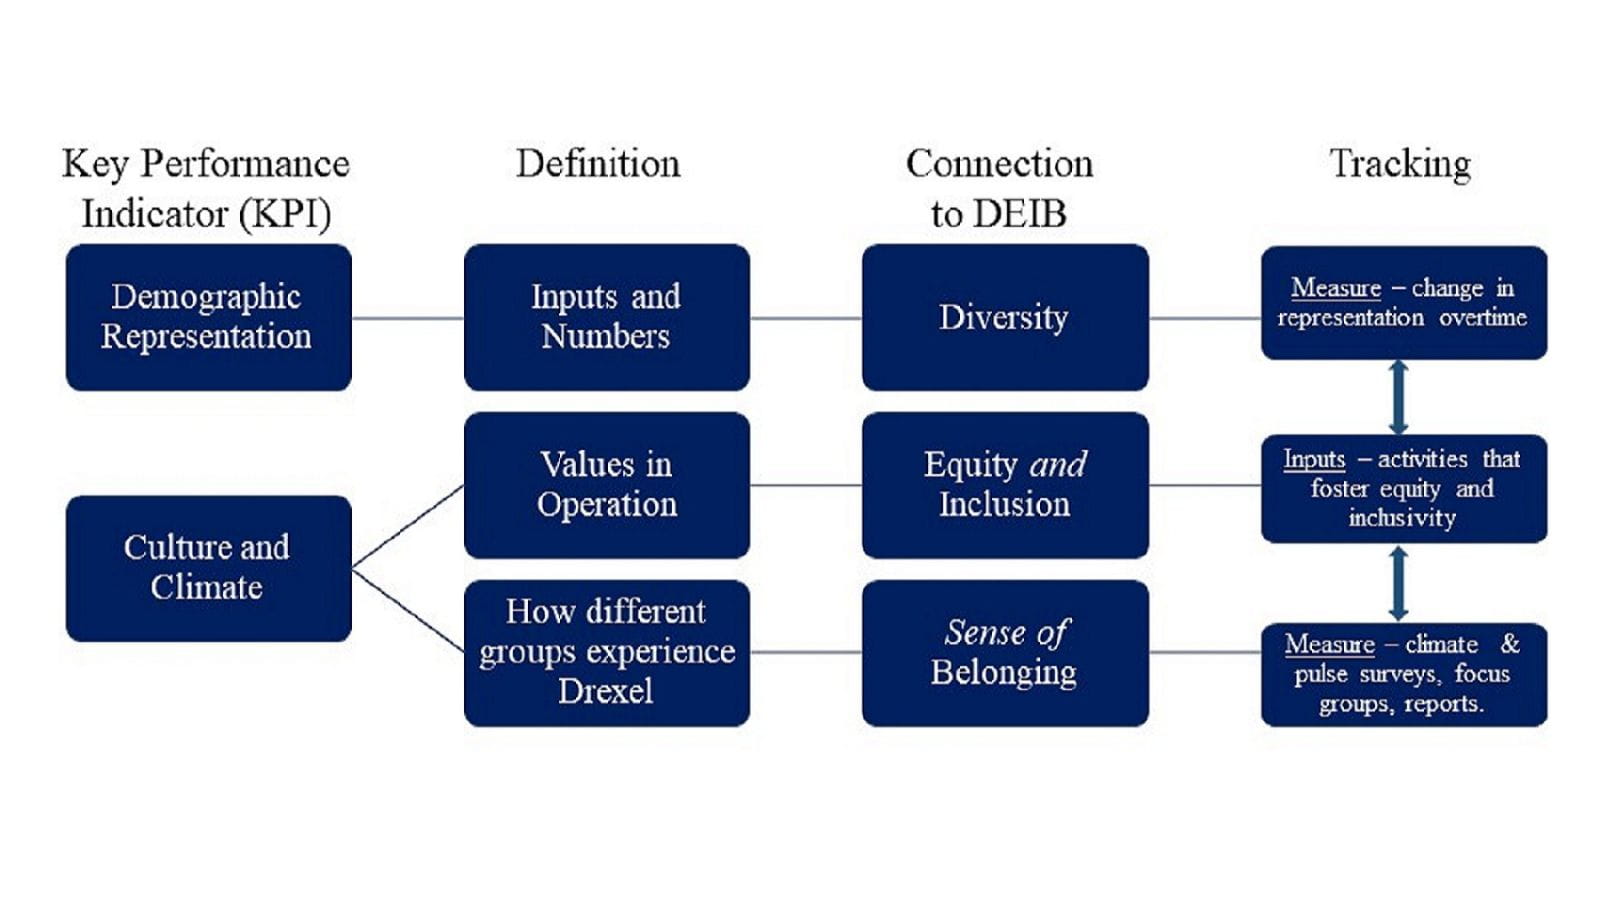 Image of success monitoring framework reflecting demographic representation and culture and climate with definitions, connection to diversity, equity, inclusion and belonging, and tracking methods.